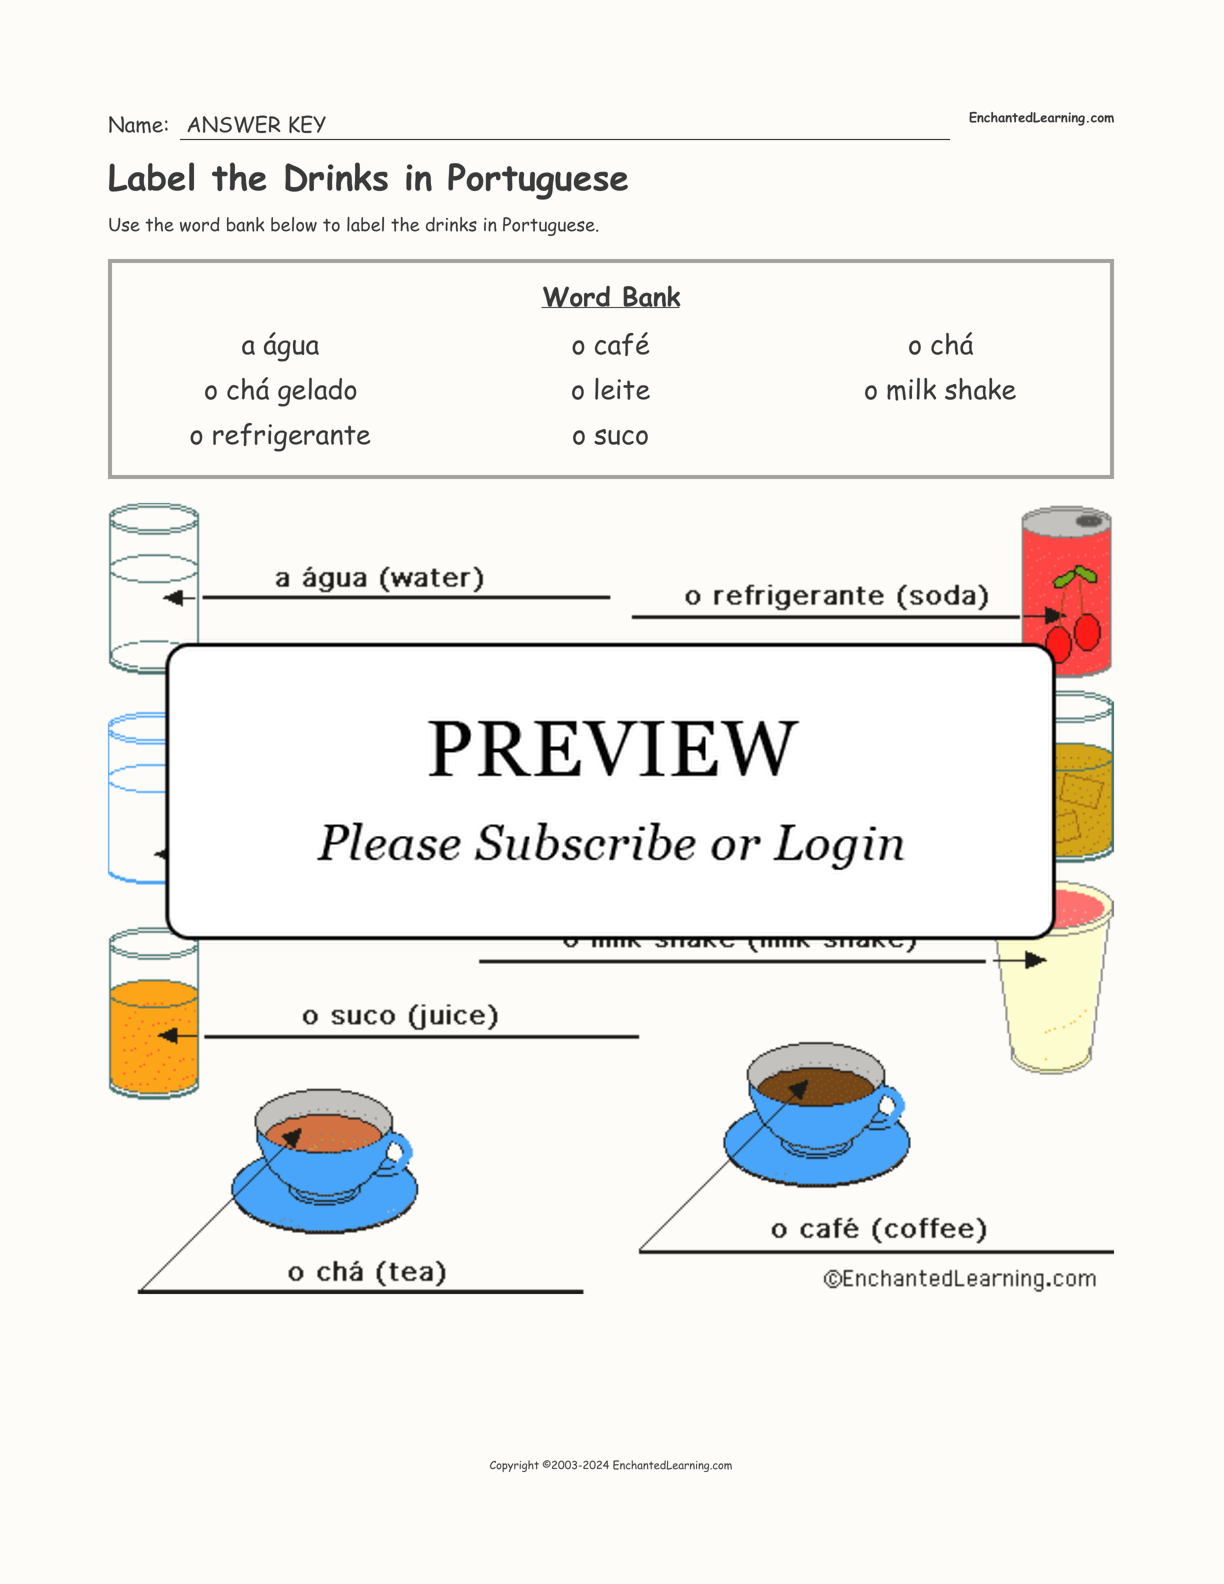 Label the Drinks in Portuguese interactive worksheet page 2